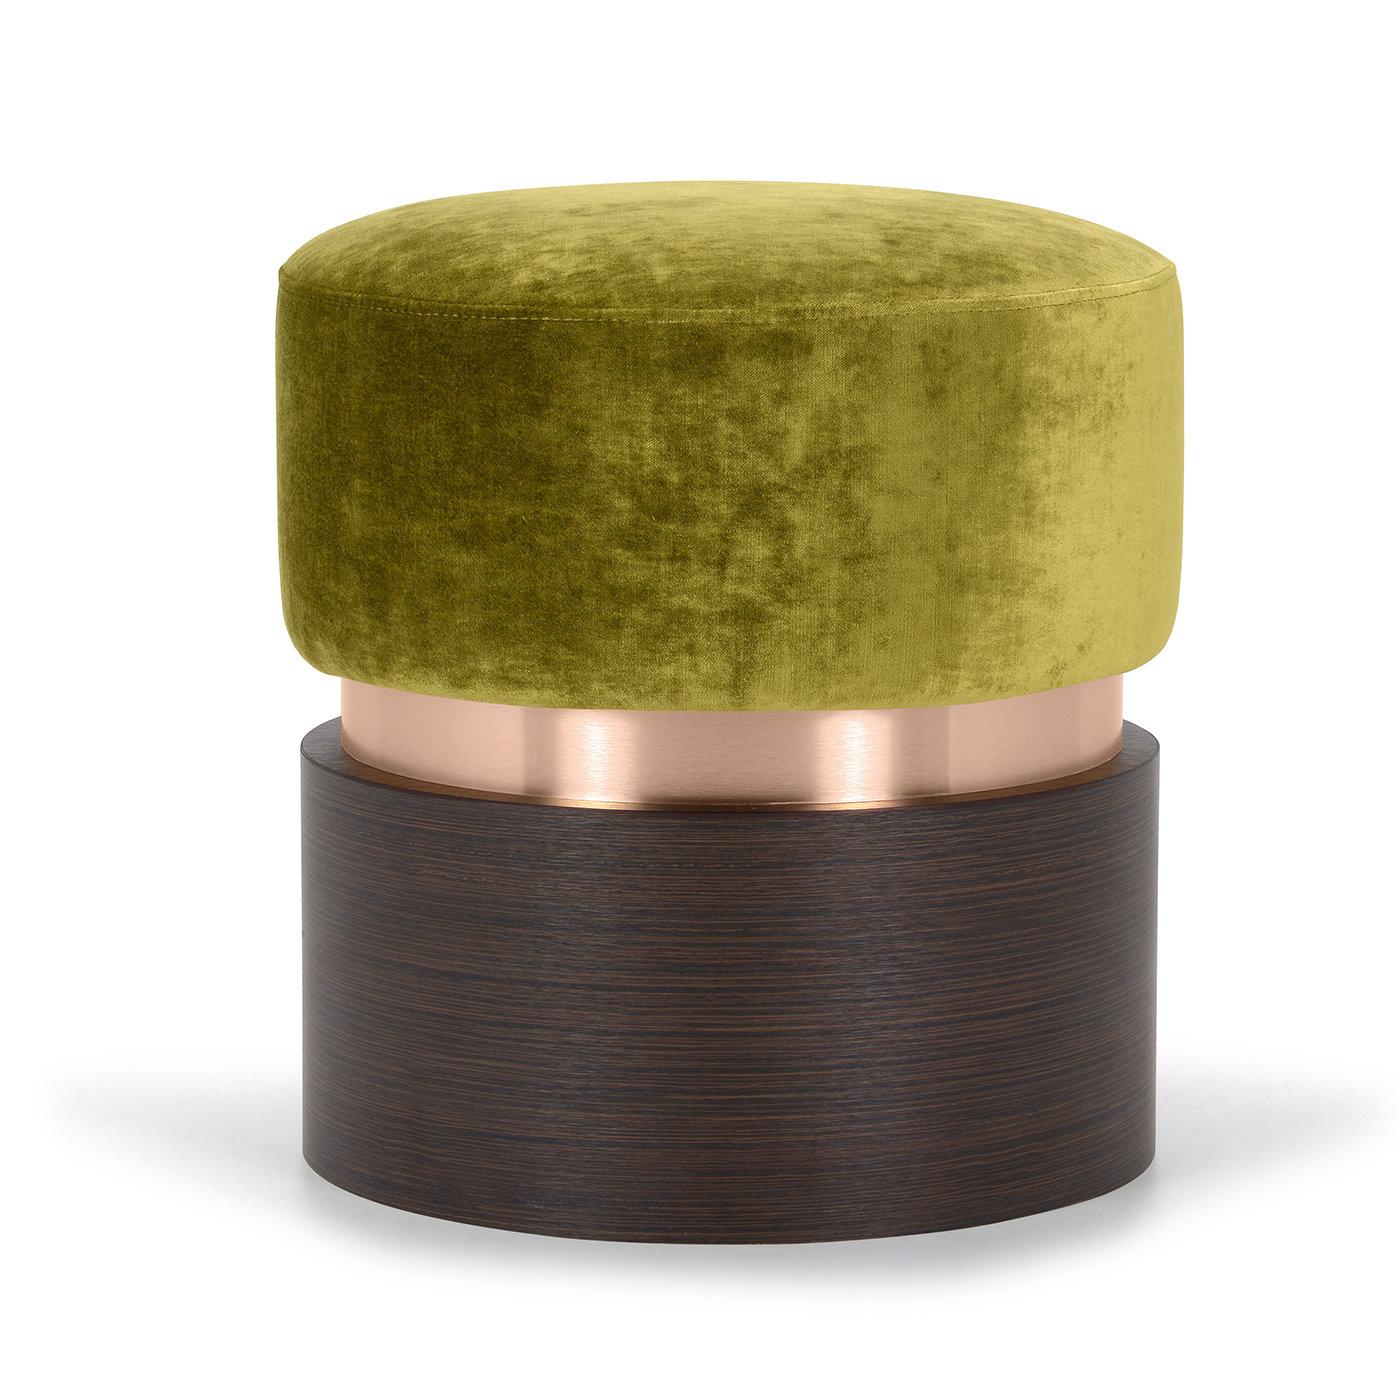 A striking combination of textures makes this handcrafted cylindrical pouf an ideal addition to elegant modern spaces. The plinth base in wenge-finished laminate embraces the laminate section distinguished by a luminous, satin copper finish that is